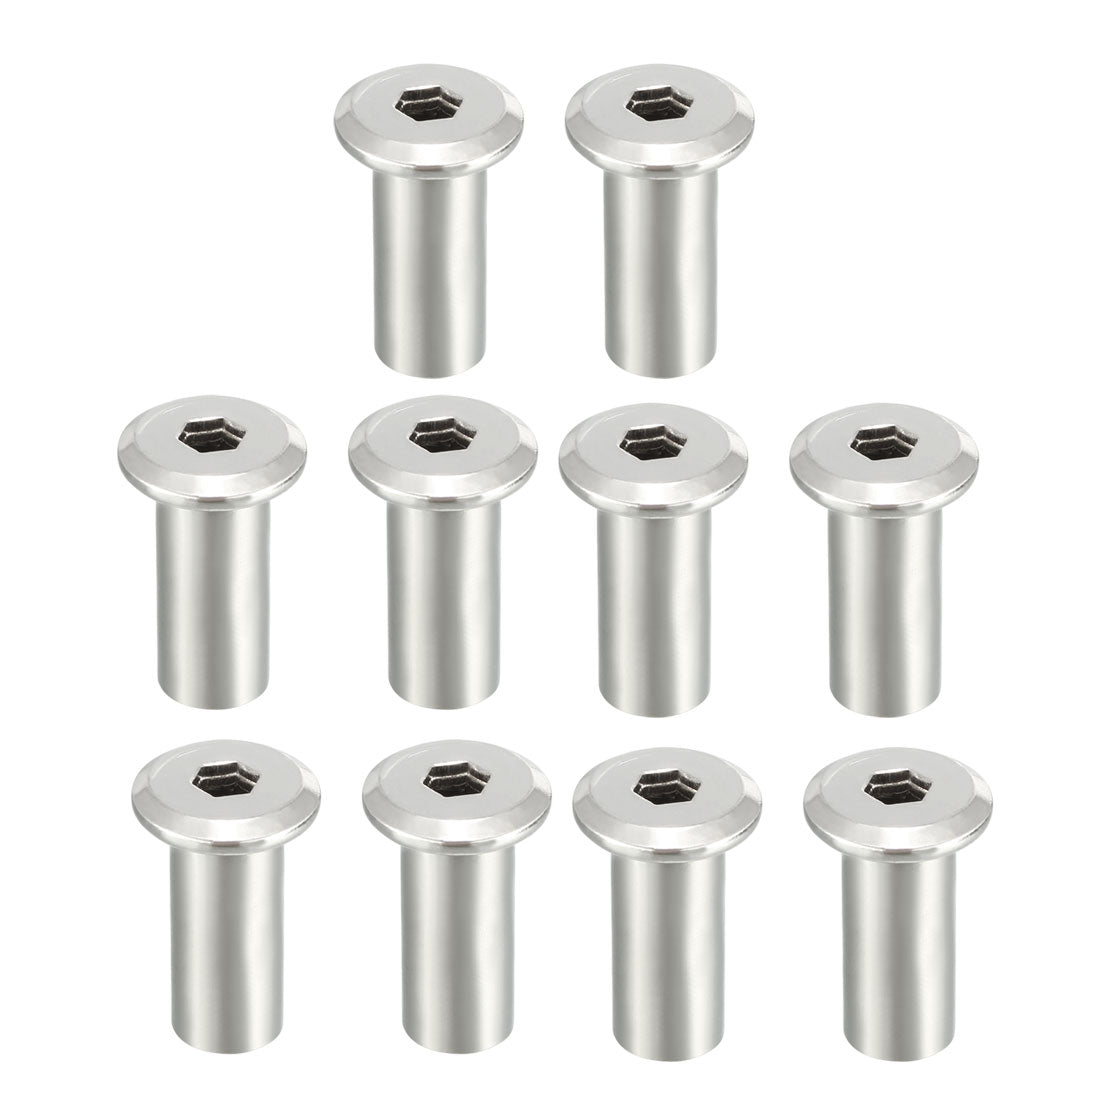 uxcell Uxcell M8x20mm Hex Socket Head Insert Nut Screw Post Sleeve Nut for Furniture 10pcs